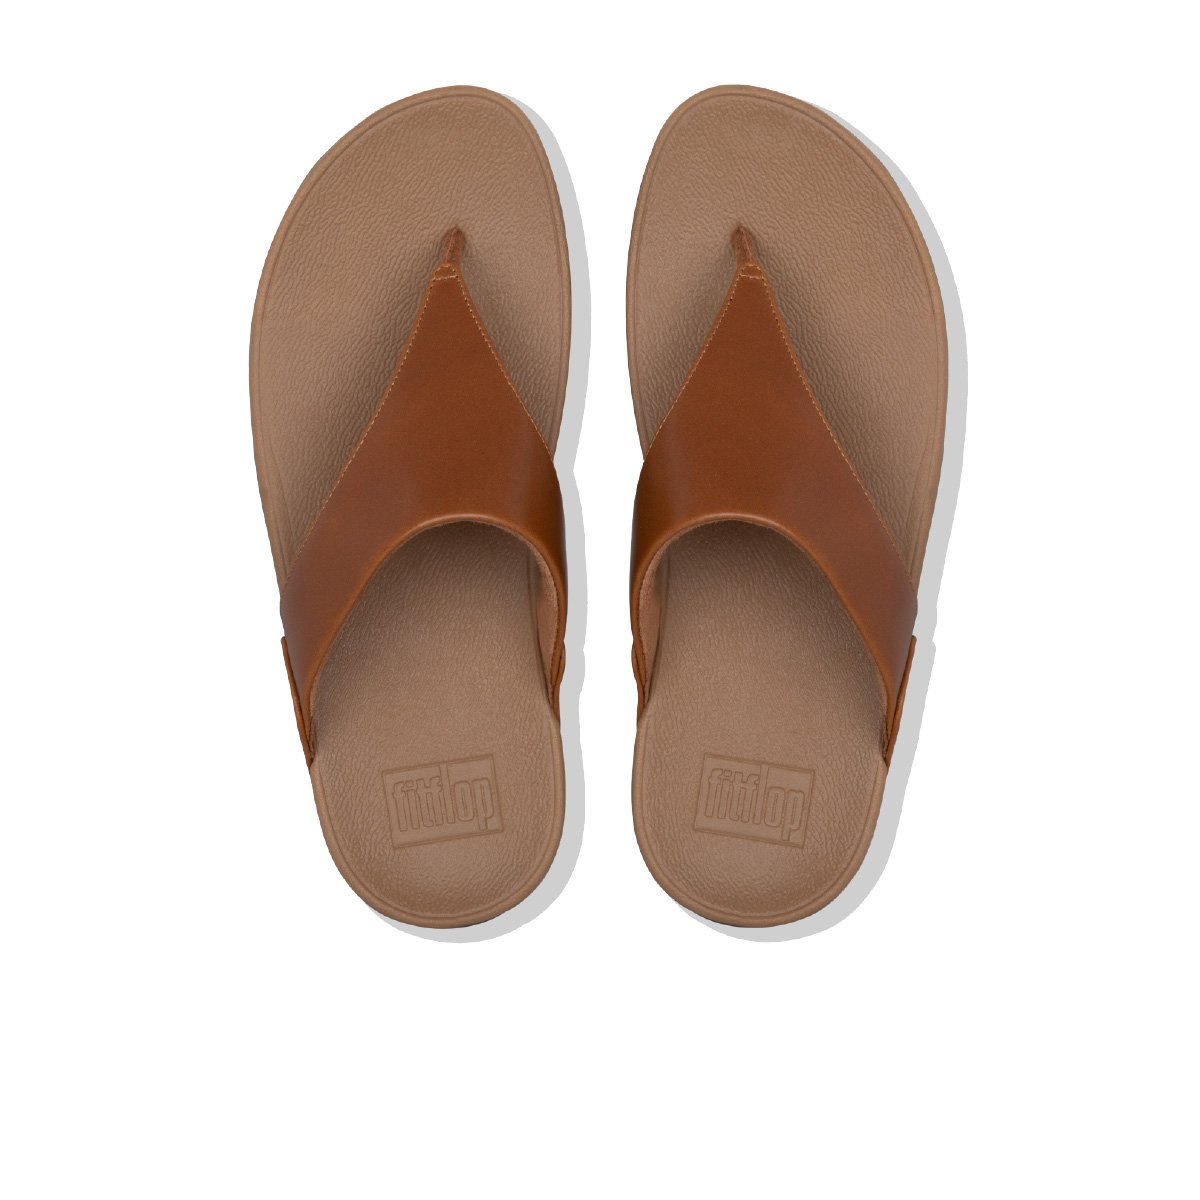 LULU Leather Toe-Post Sandals Light Tan top view